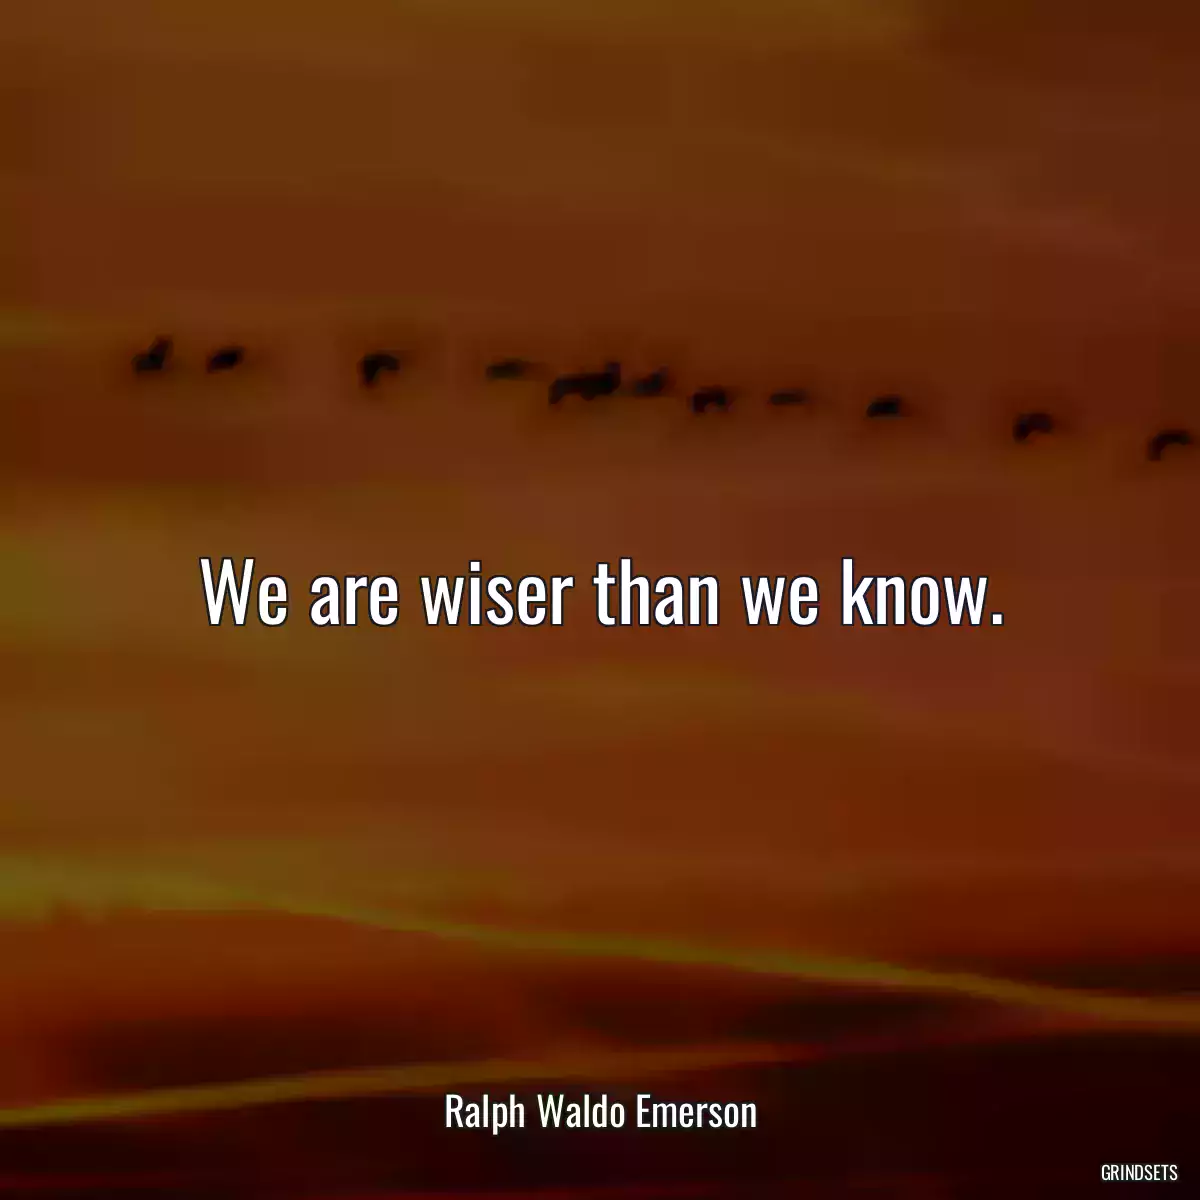 We are wiser than we know.